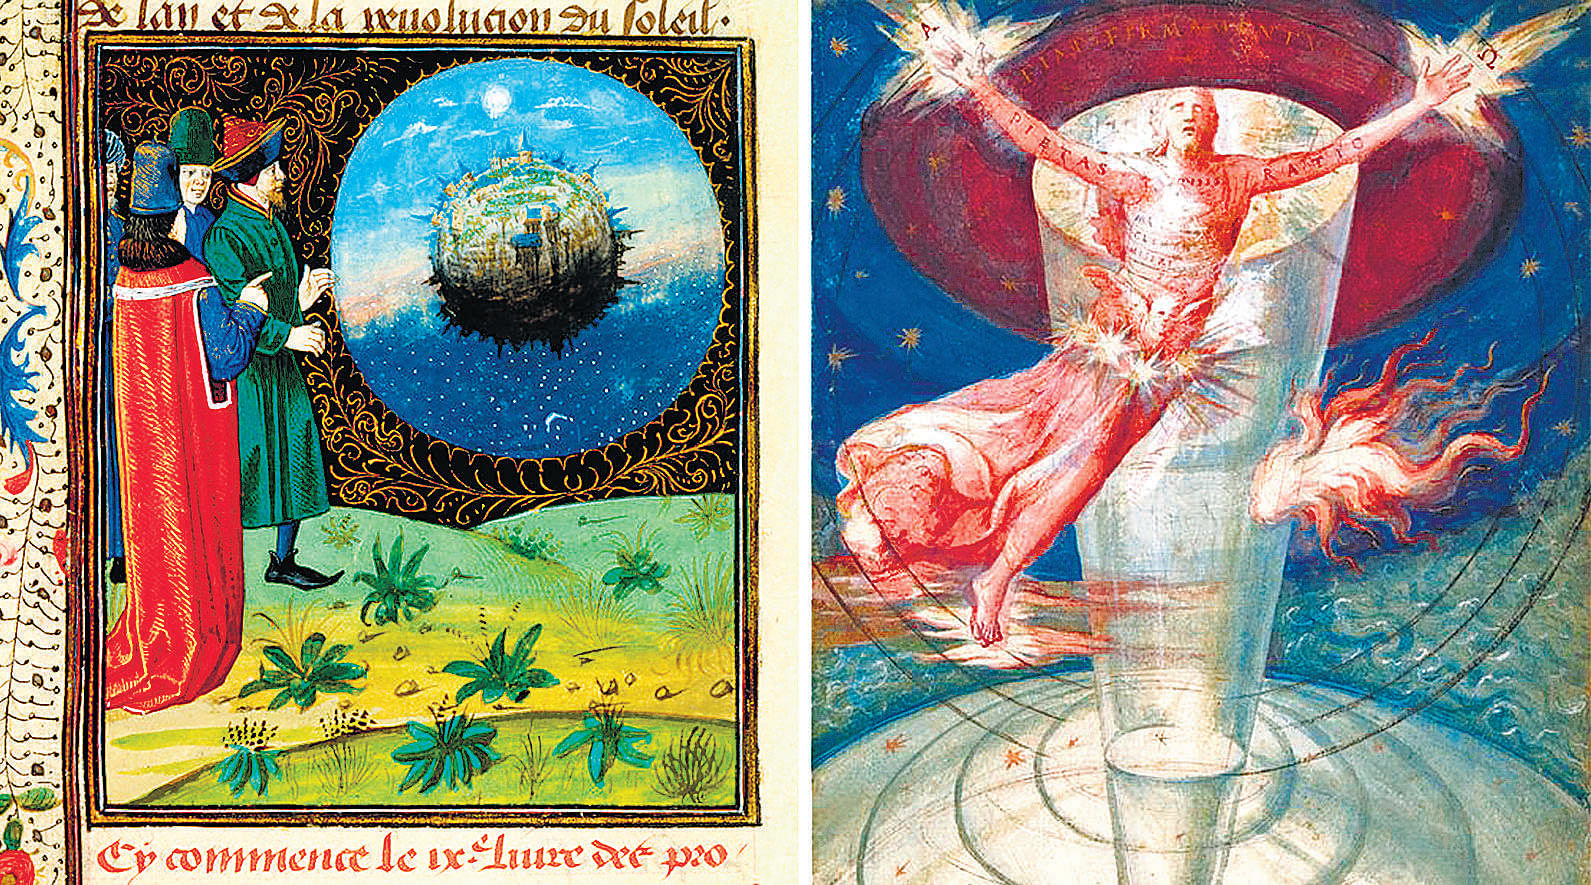 A15th century rendering of Earth as aweightless, studded sphere (left) and the 1573 image of an omnipresent creator by the Portuguese artist Francisco de Holanda (right) are part of the book "Cosmigraphics: Picturing Space Through Time." NYT